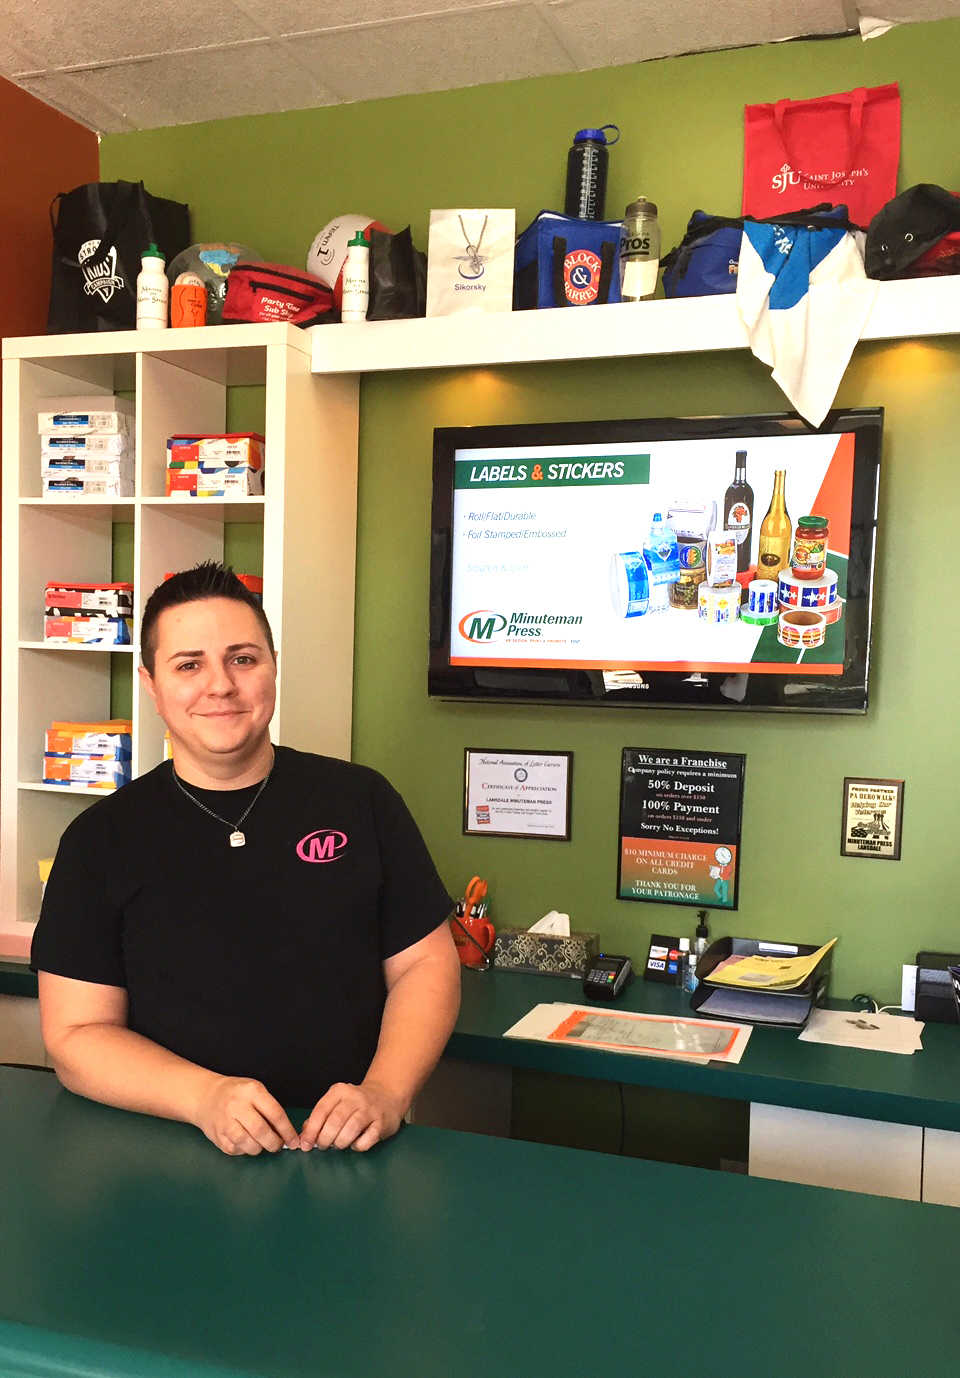 Doug DiPasquale opened his first Minuteman Press franchise in Lansdale, PA when he was 22 years old. Now 32, Doug owns his second center in Eagleville, PA